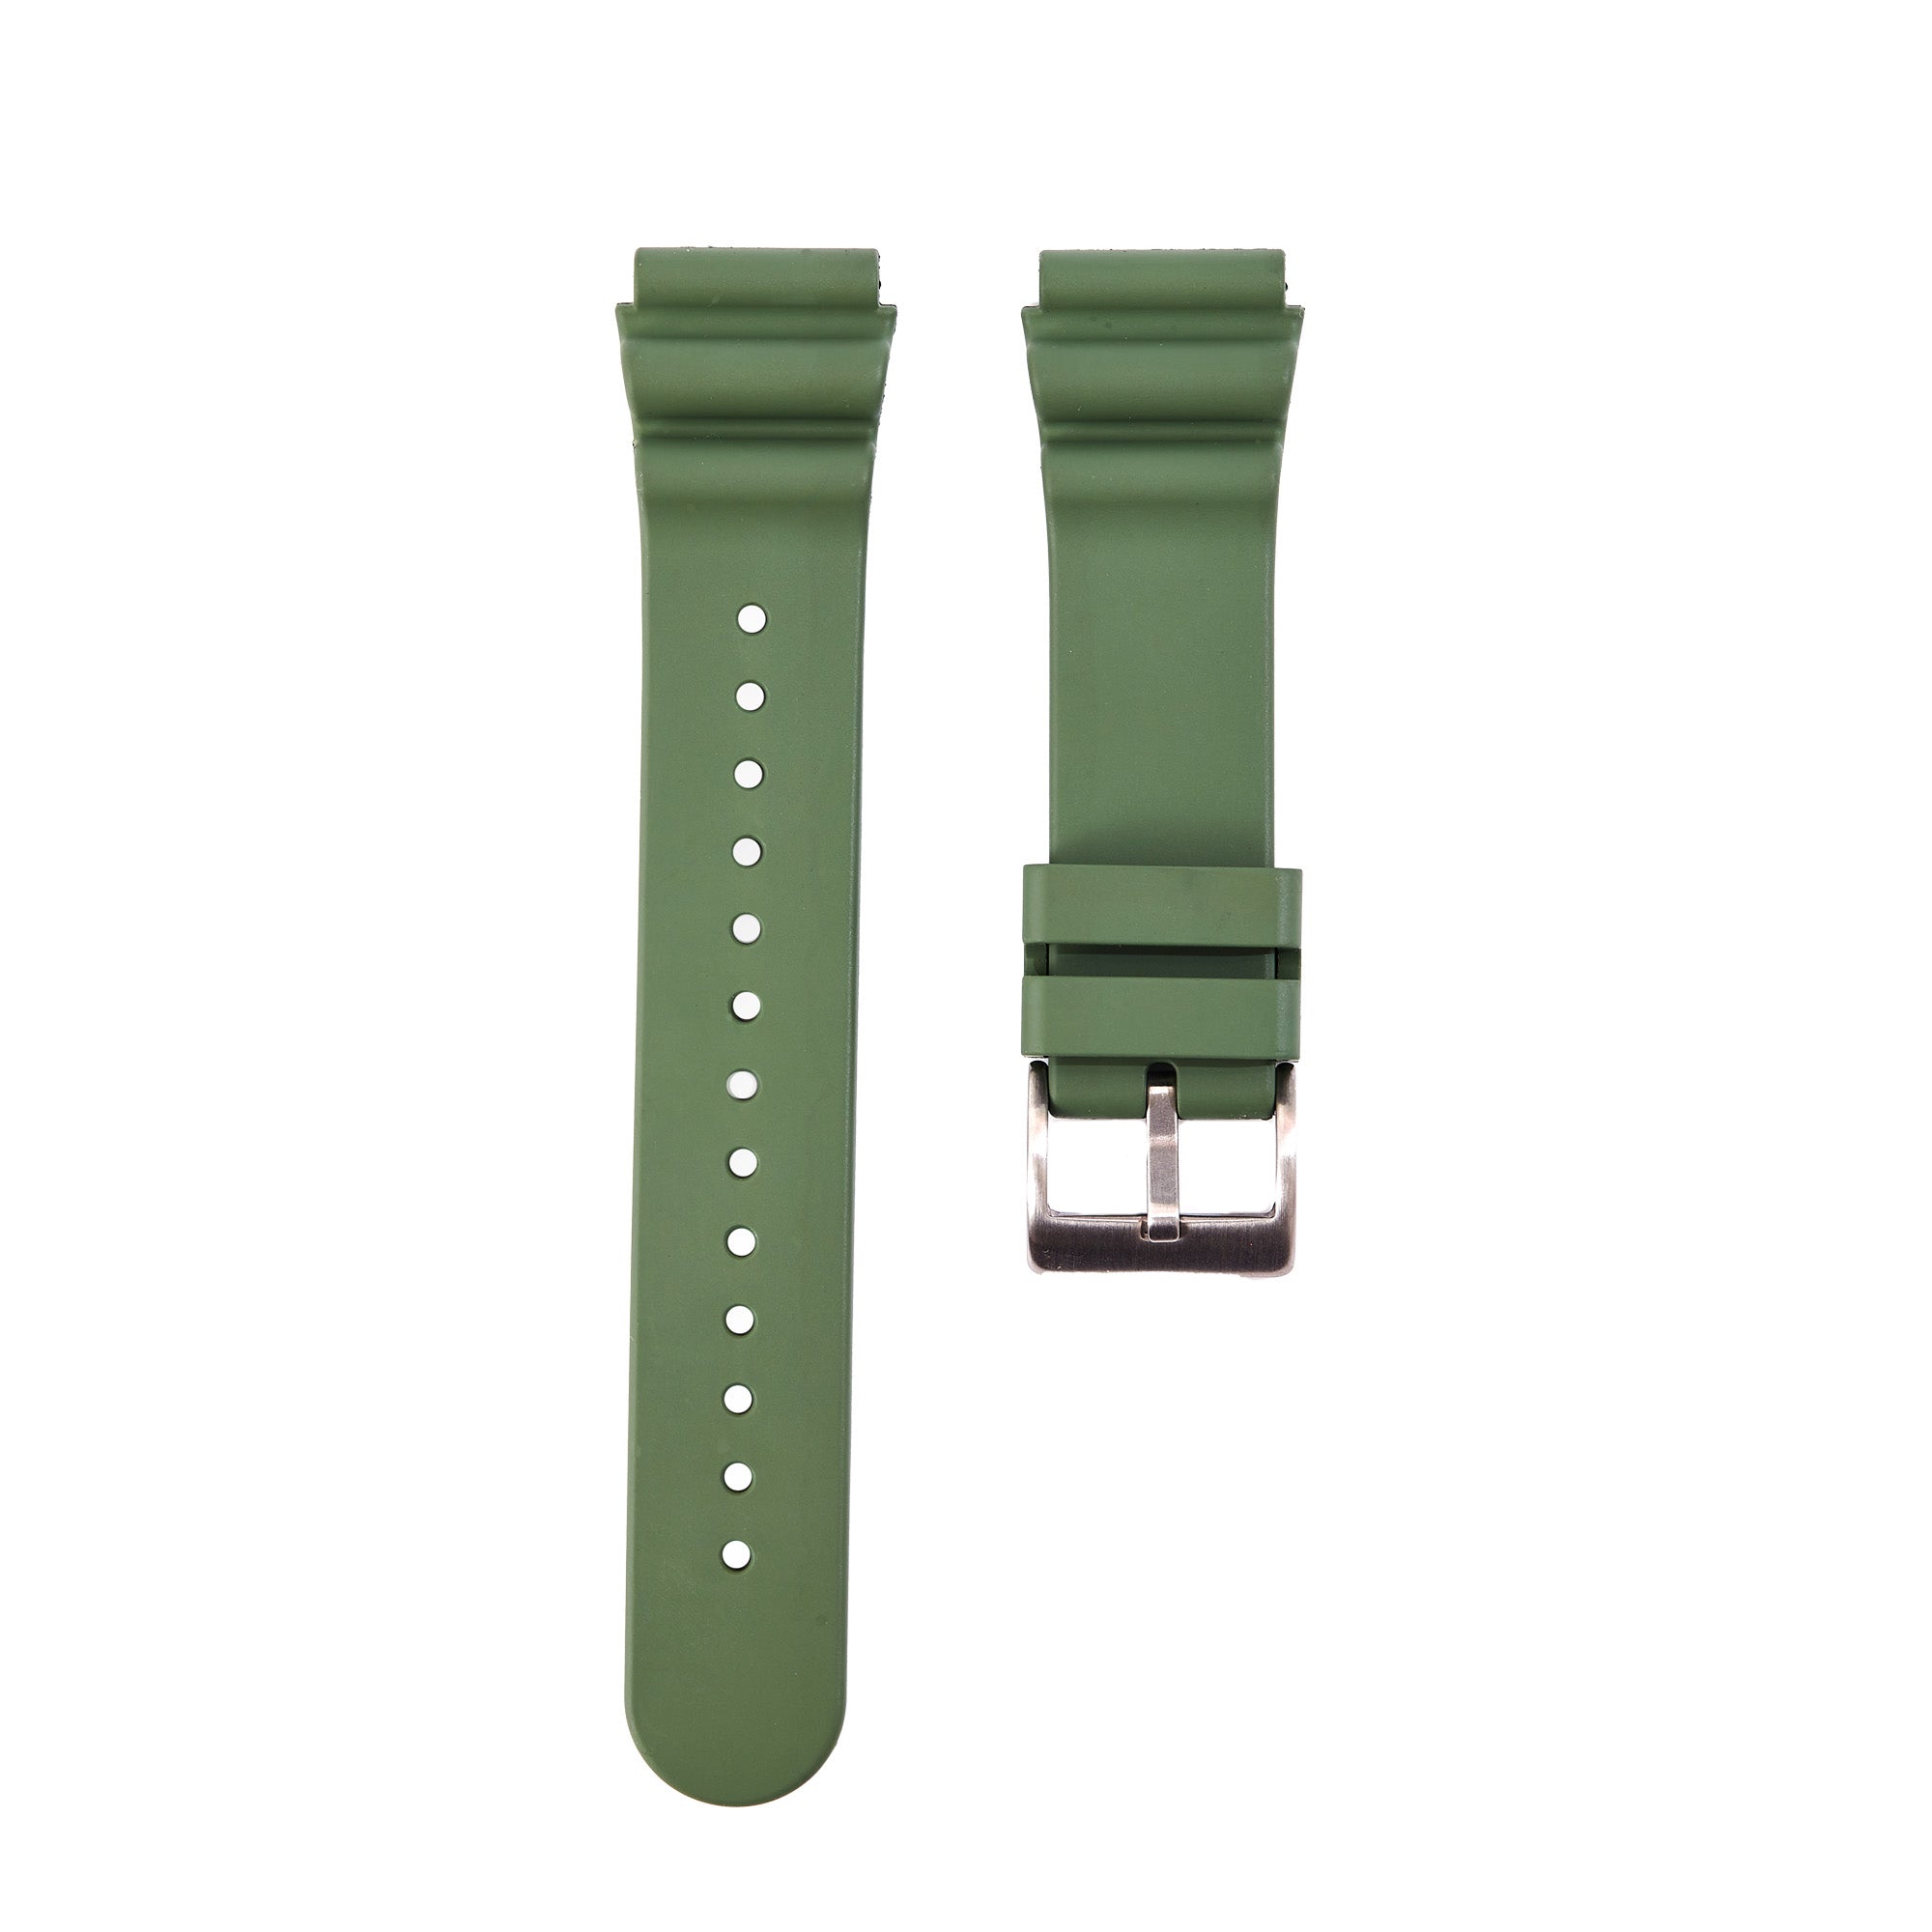 Wave FKM Rubber Strap-Compatible with Seiko Watches-Army Green (2413)